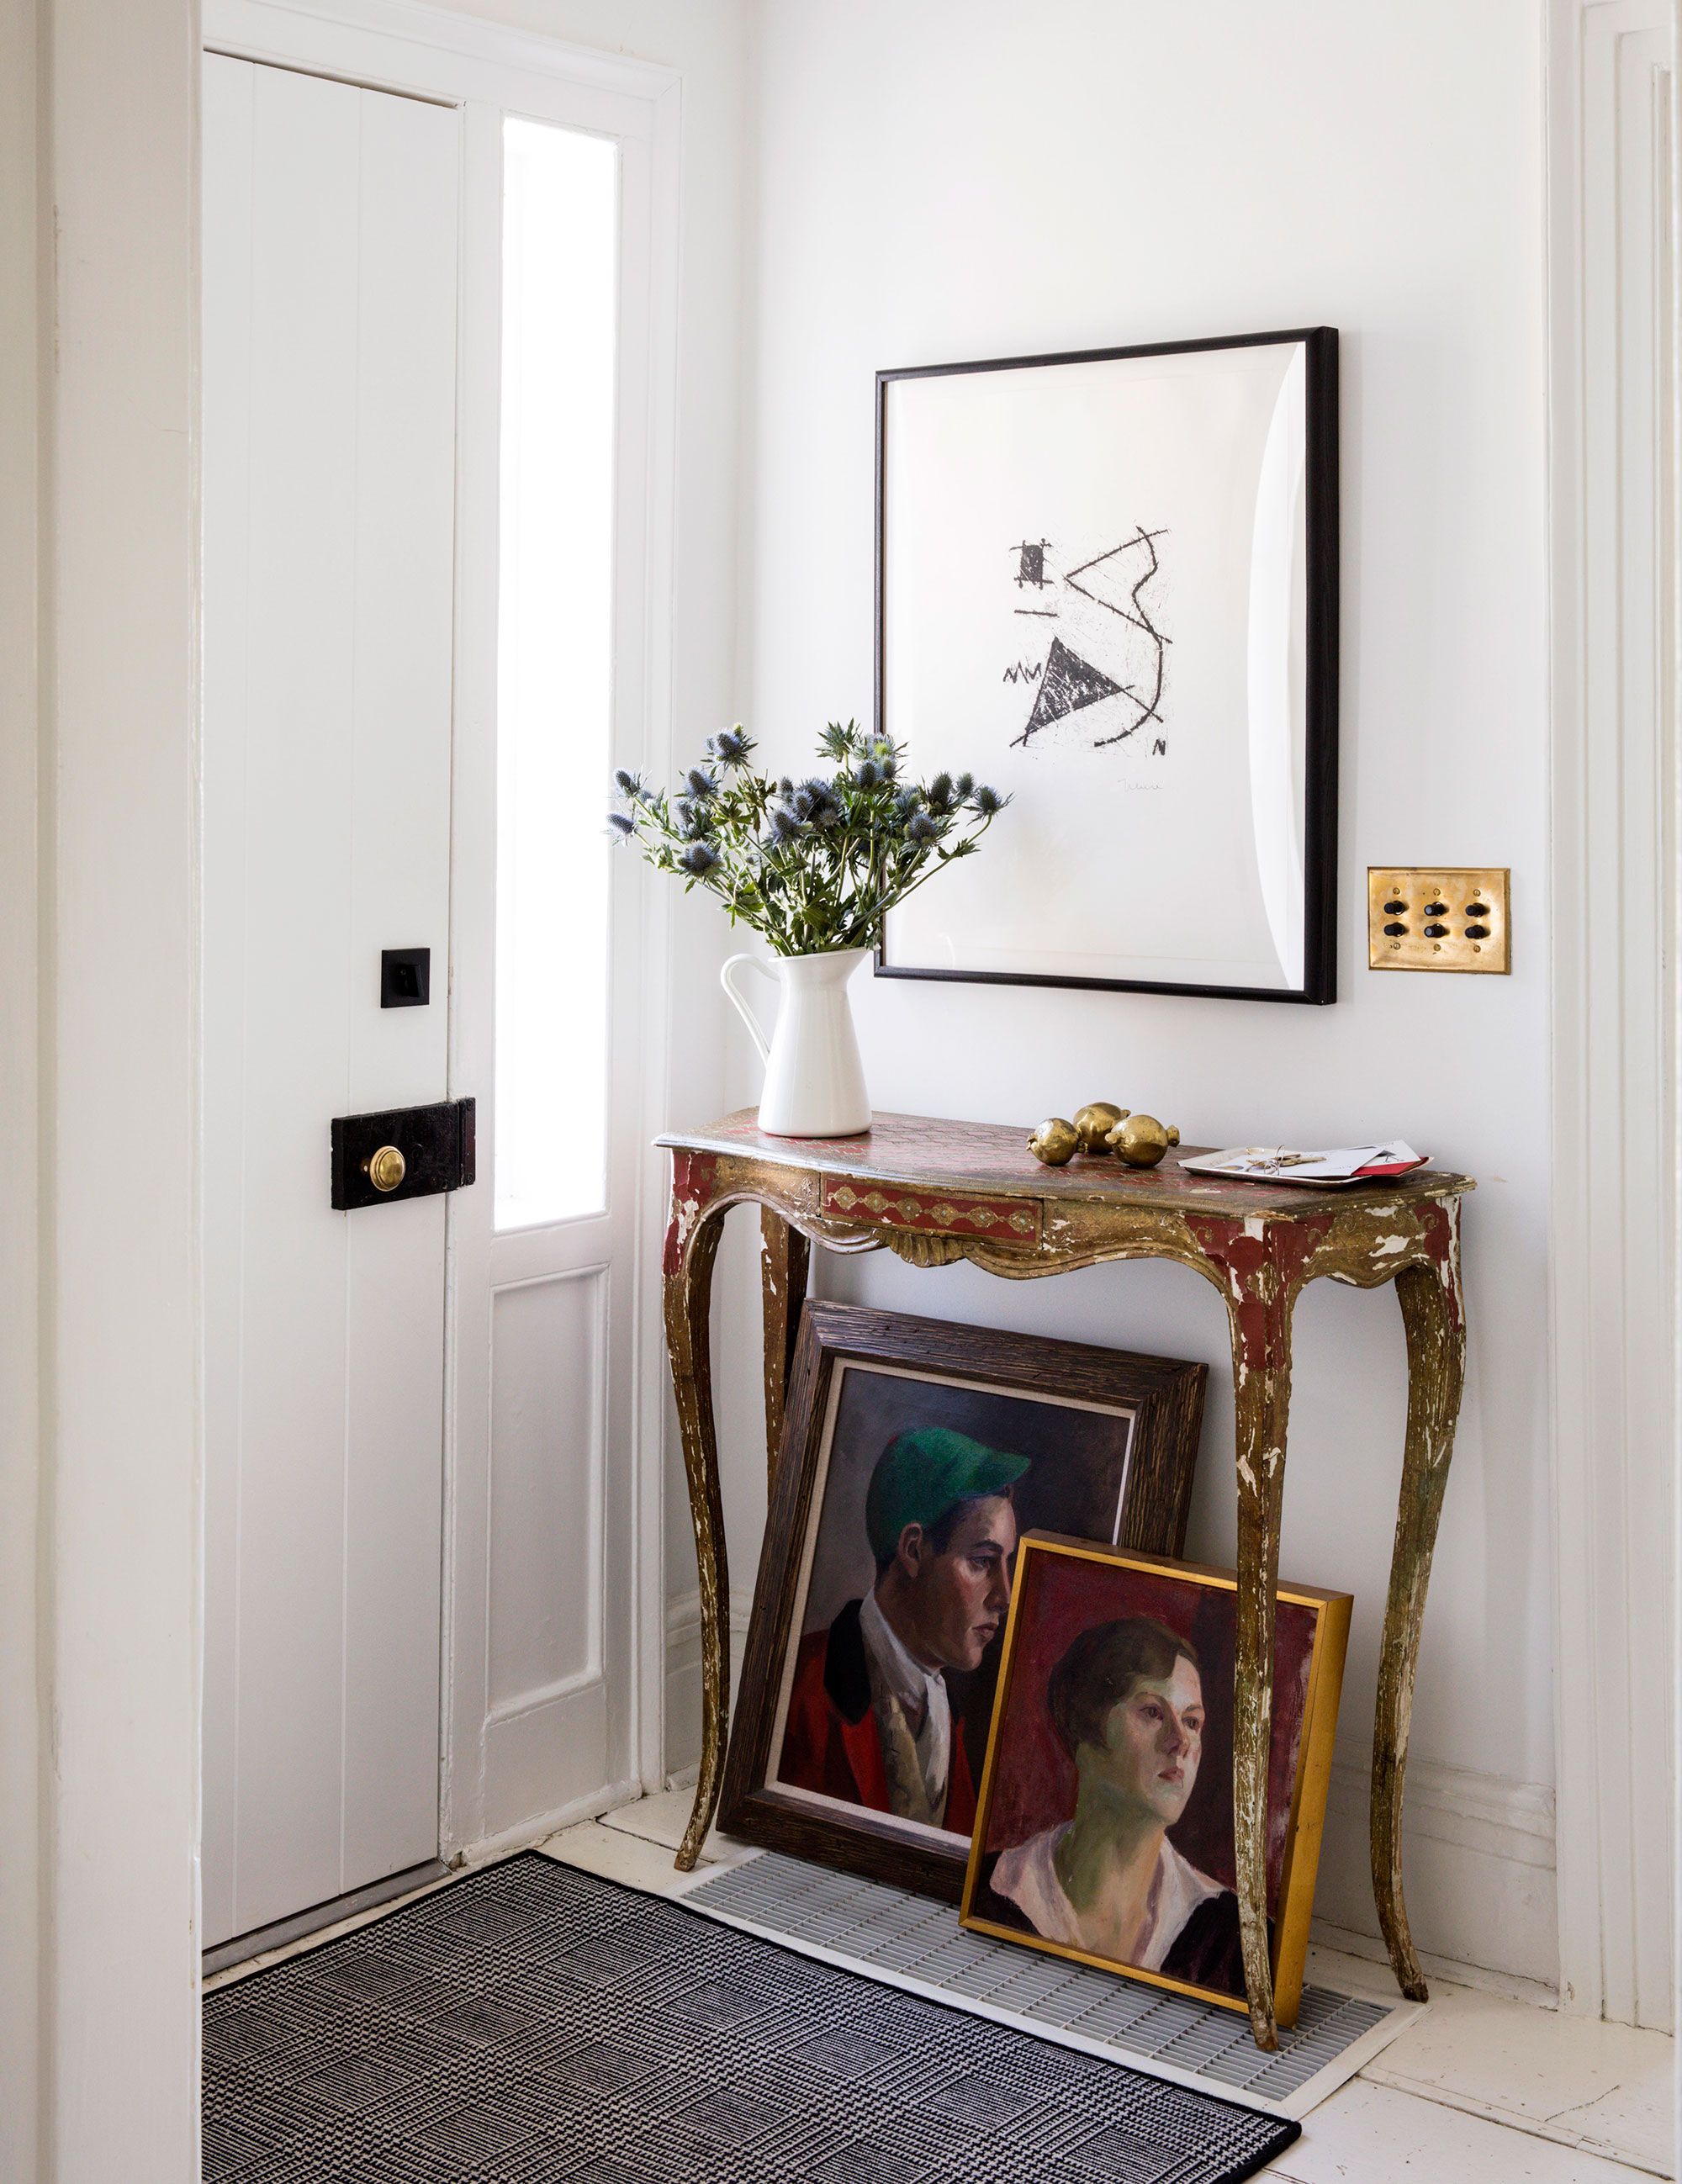 Entryway ideas - 12 incredible spaces for a warm welcome | Livingetc